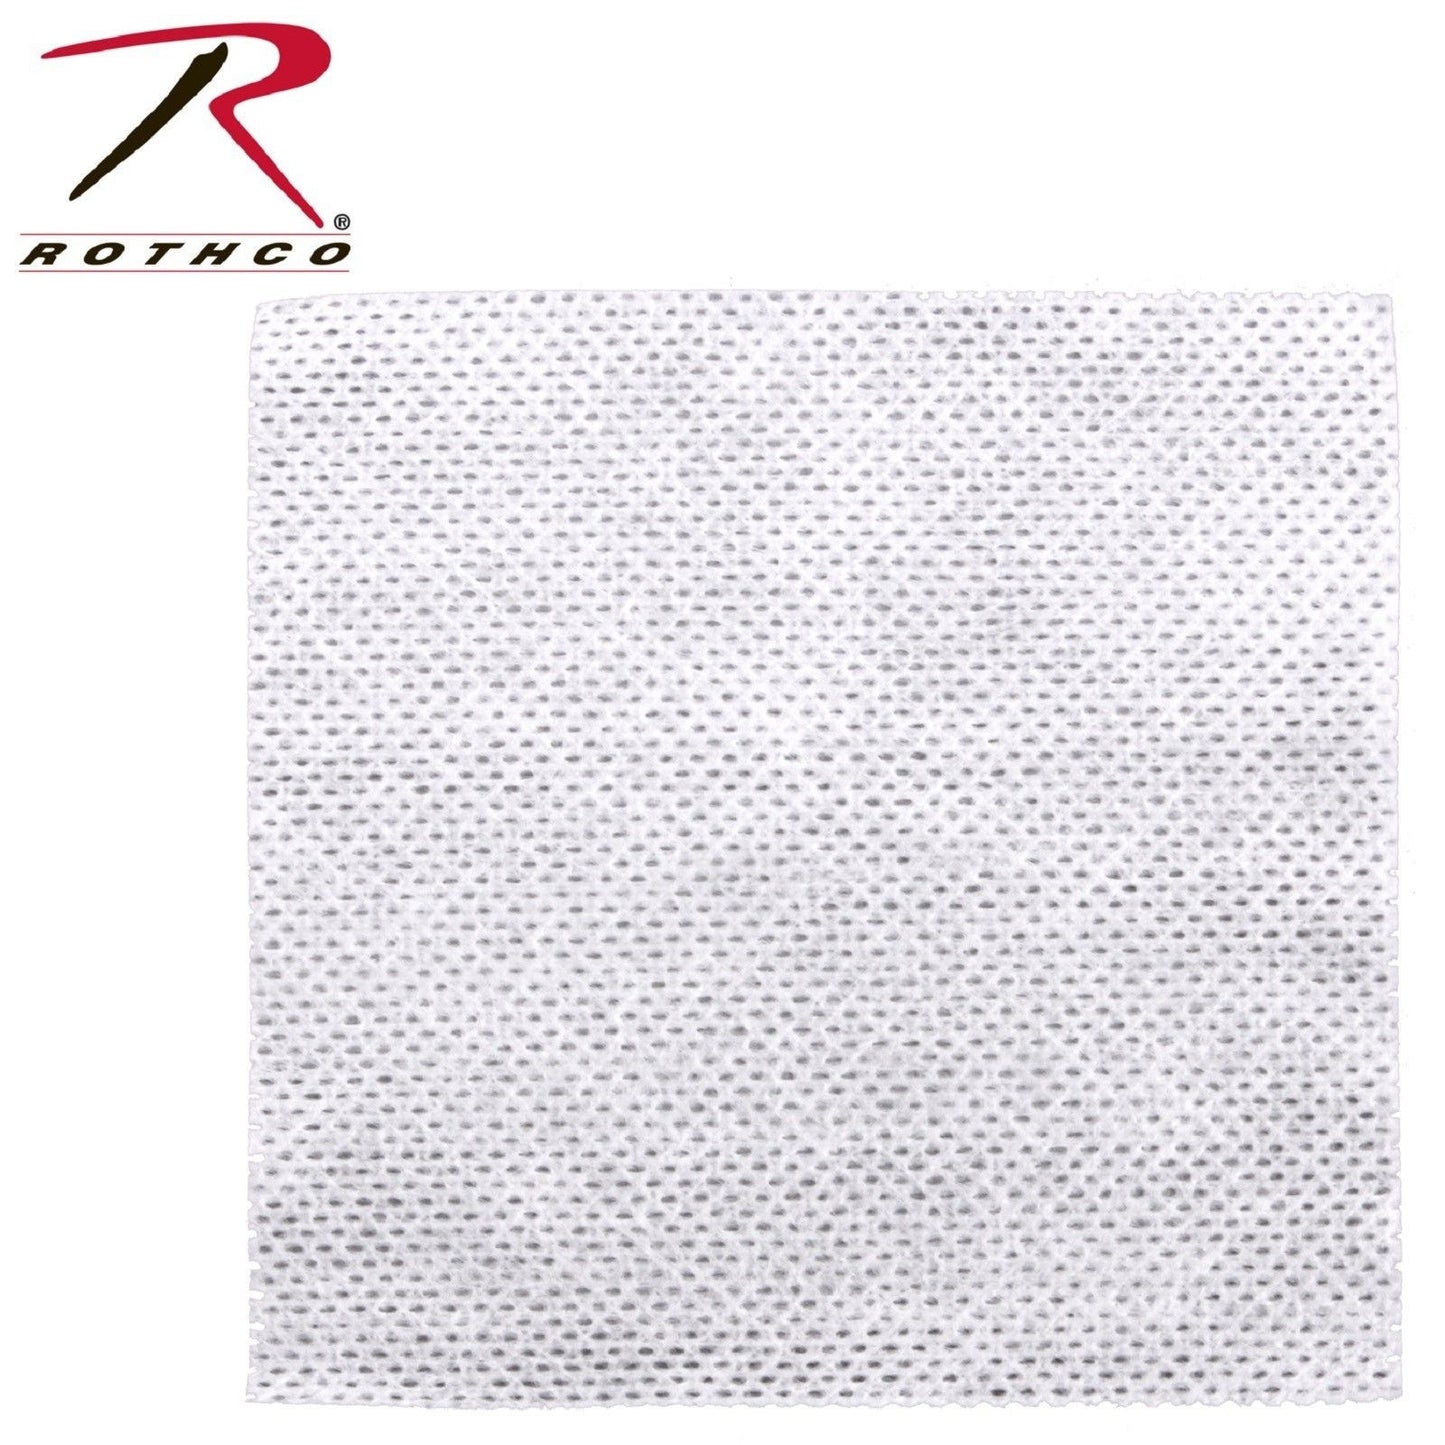 200 Cotton Cleaning Patches - Rothco 3" Dry Maintenance Patch Wipe